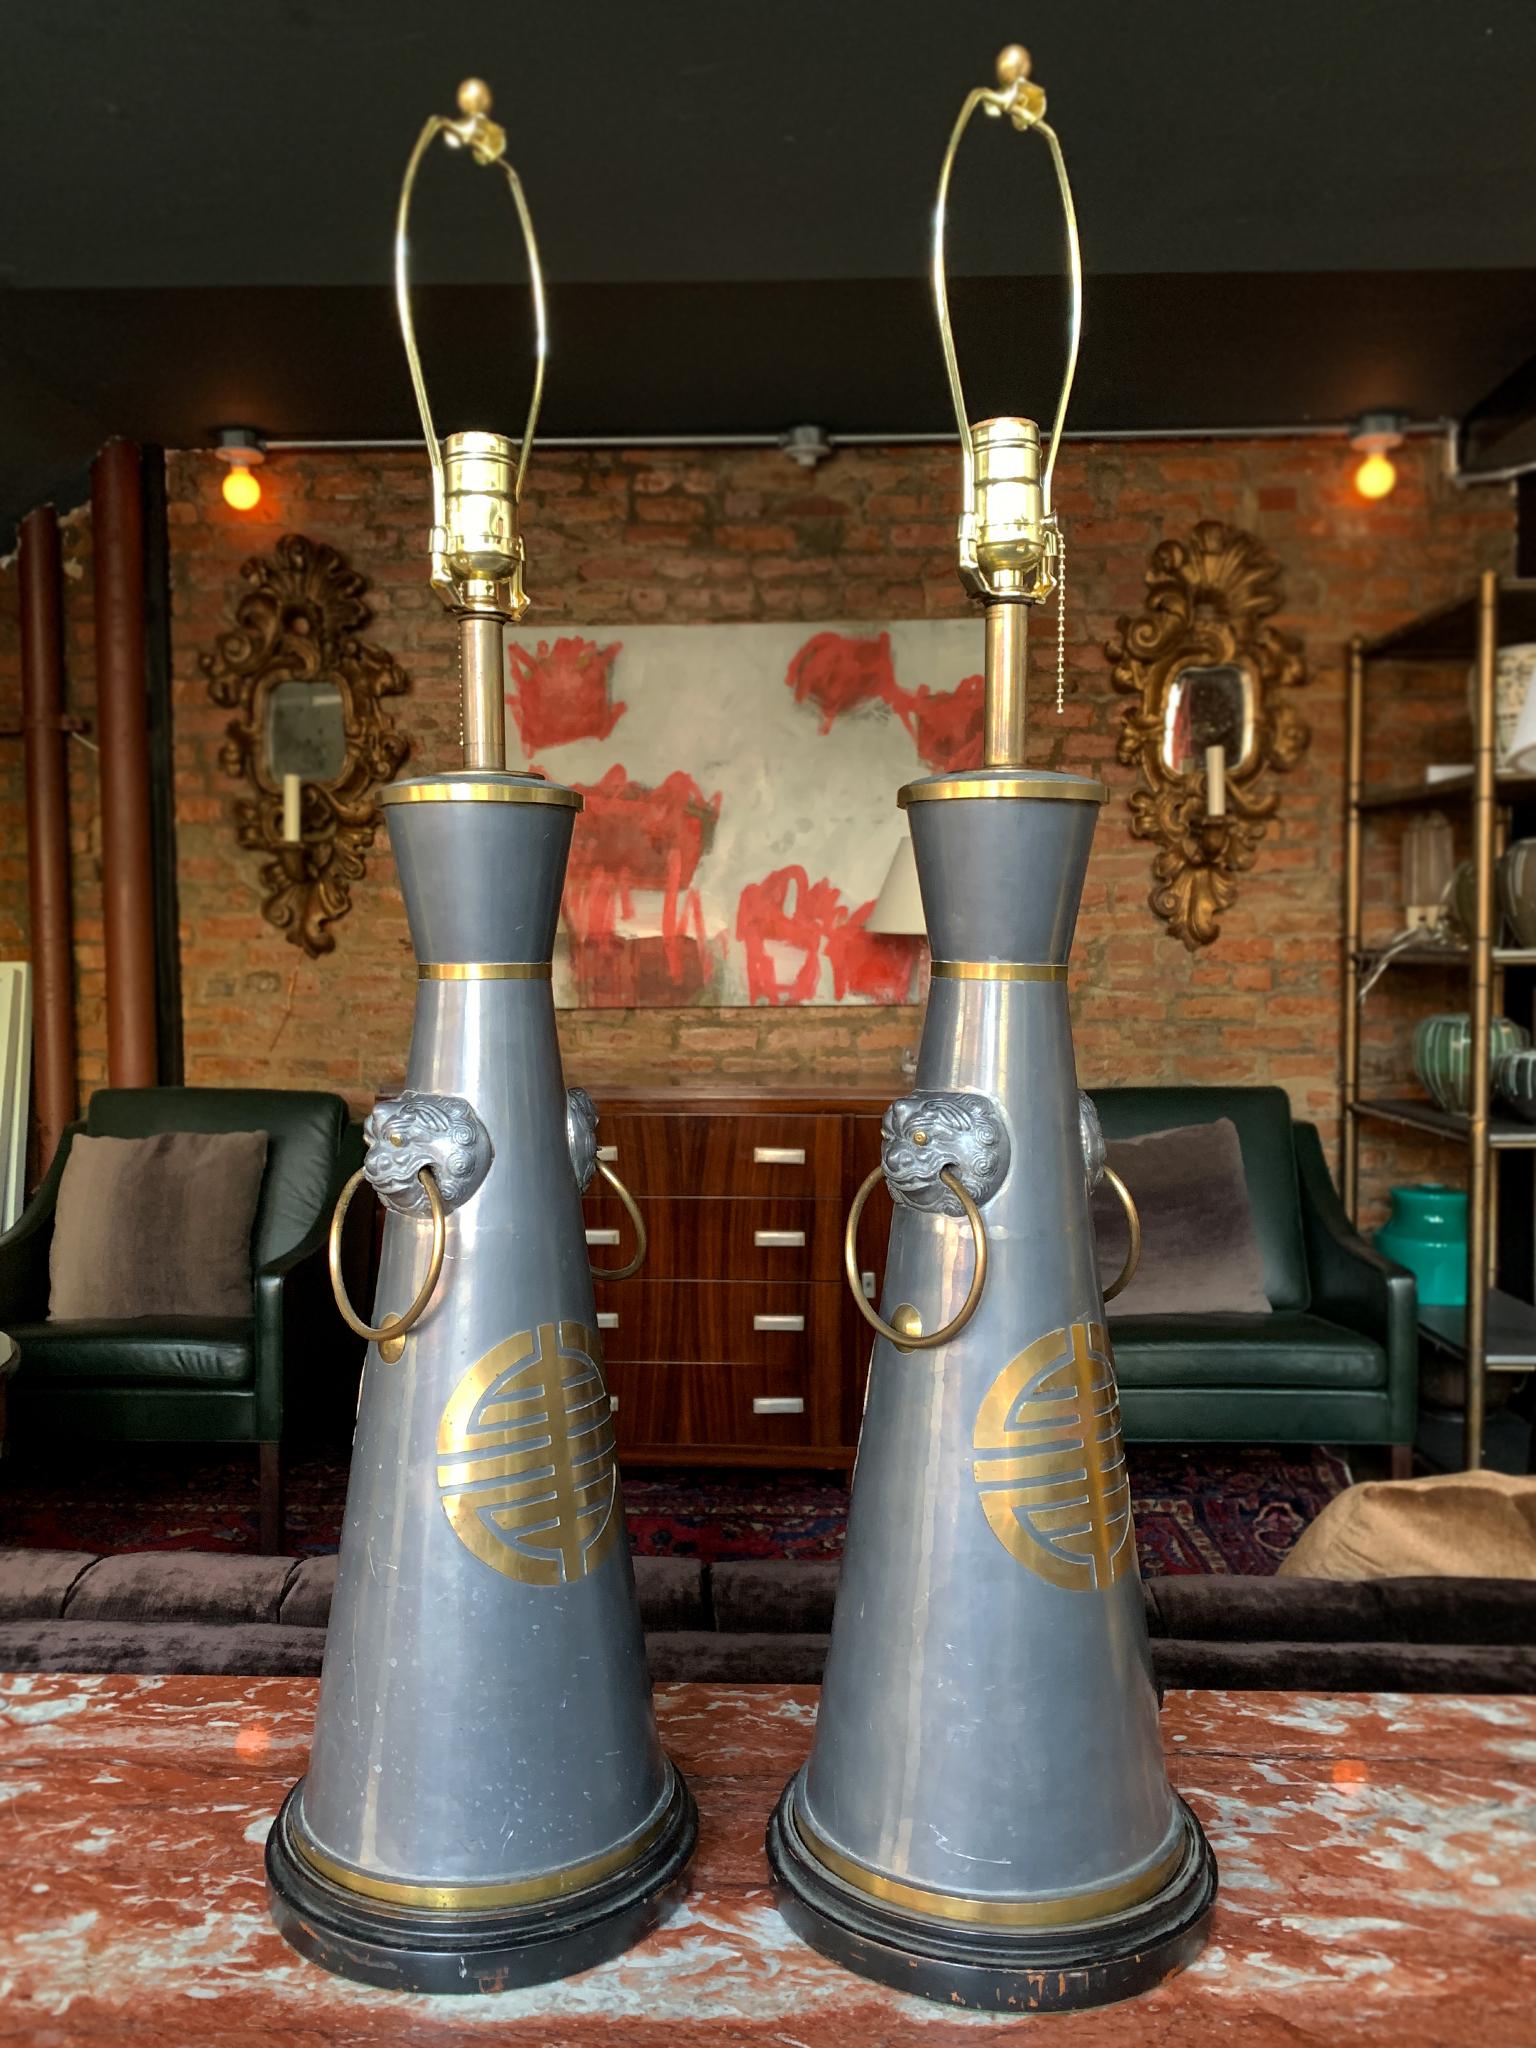 These 1940s table lamps remind us of the eclectic Hollywood Regency style of James Mont, whose various influences - from modernism to chinoiserie - converged in his furniture and lighting. The lamps have a pewter body with mounted brass trims and